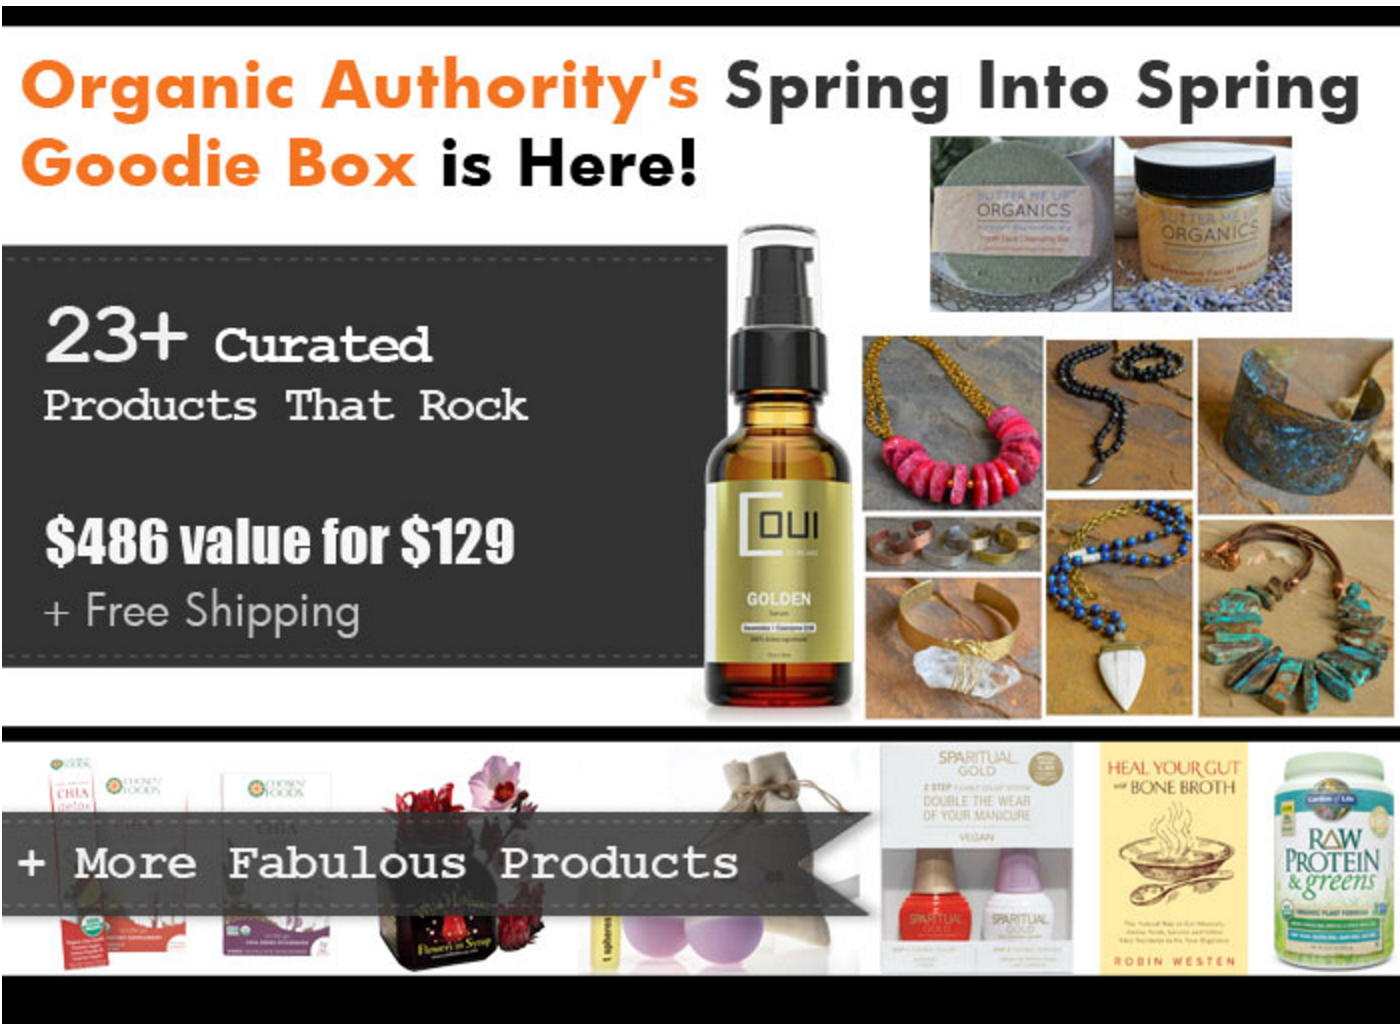 Organic Authority Lux Life Goodie Box Now Available!